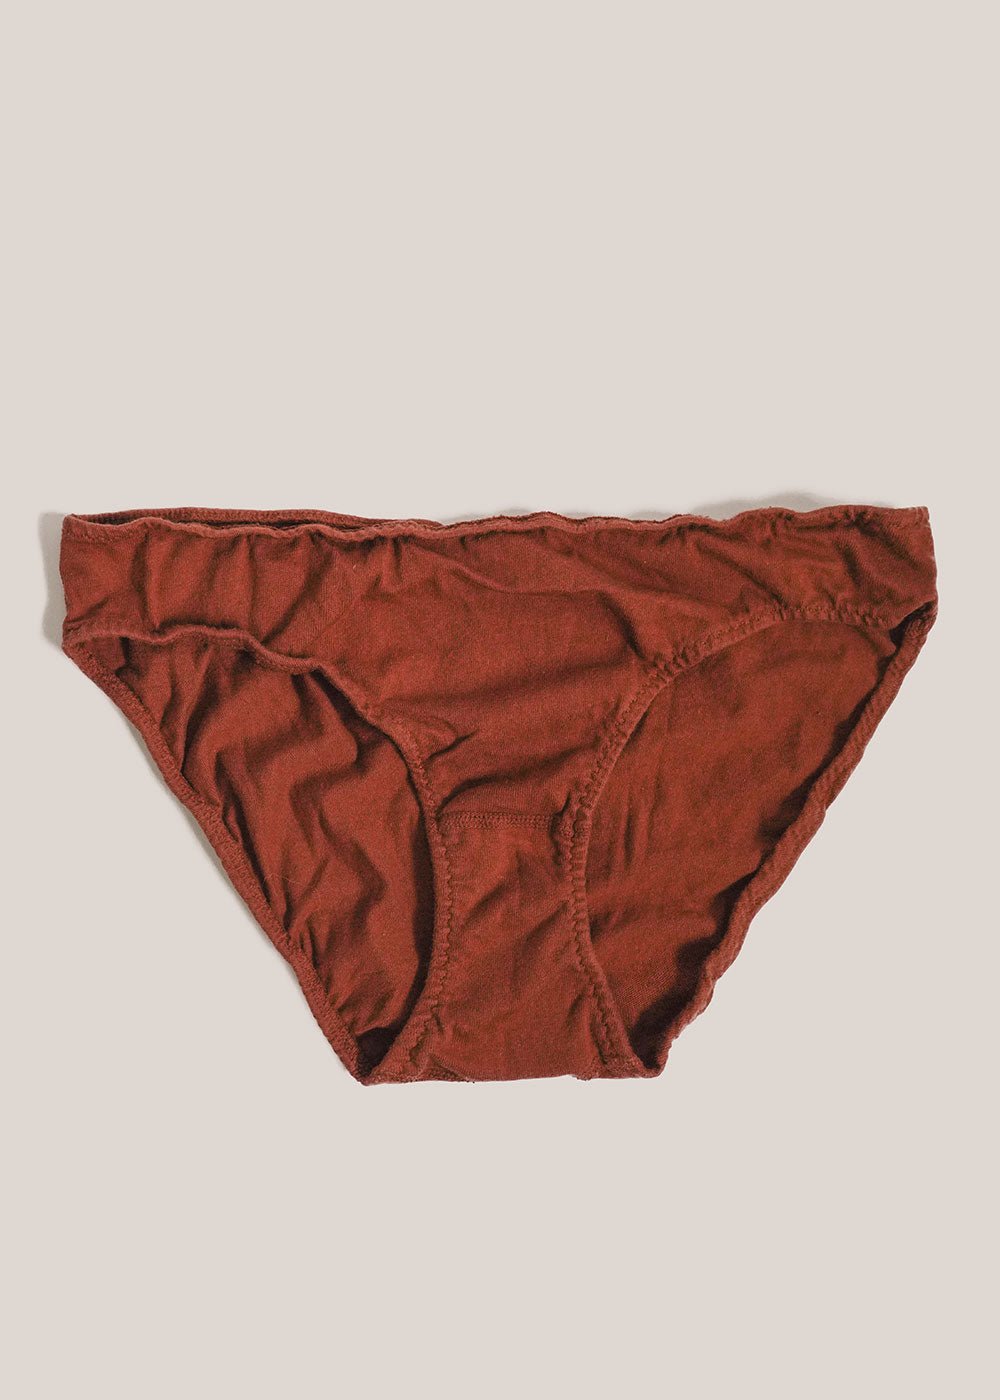 IMPORTED COTTON PANTY at Rs 65/piece